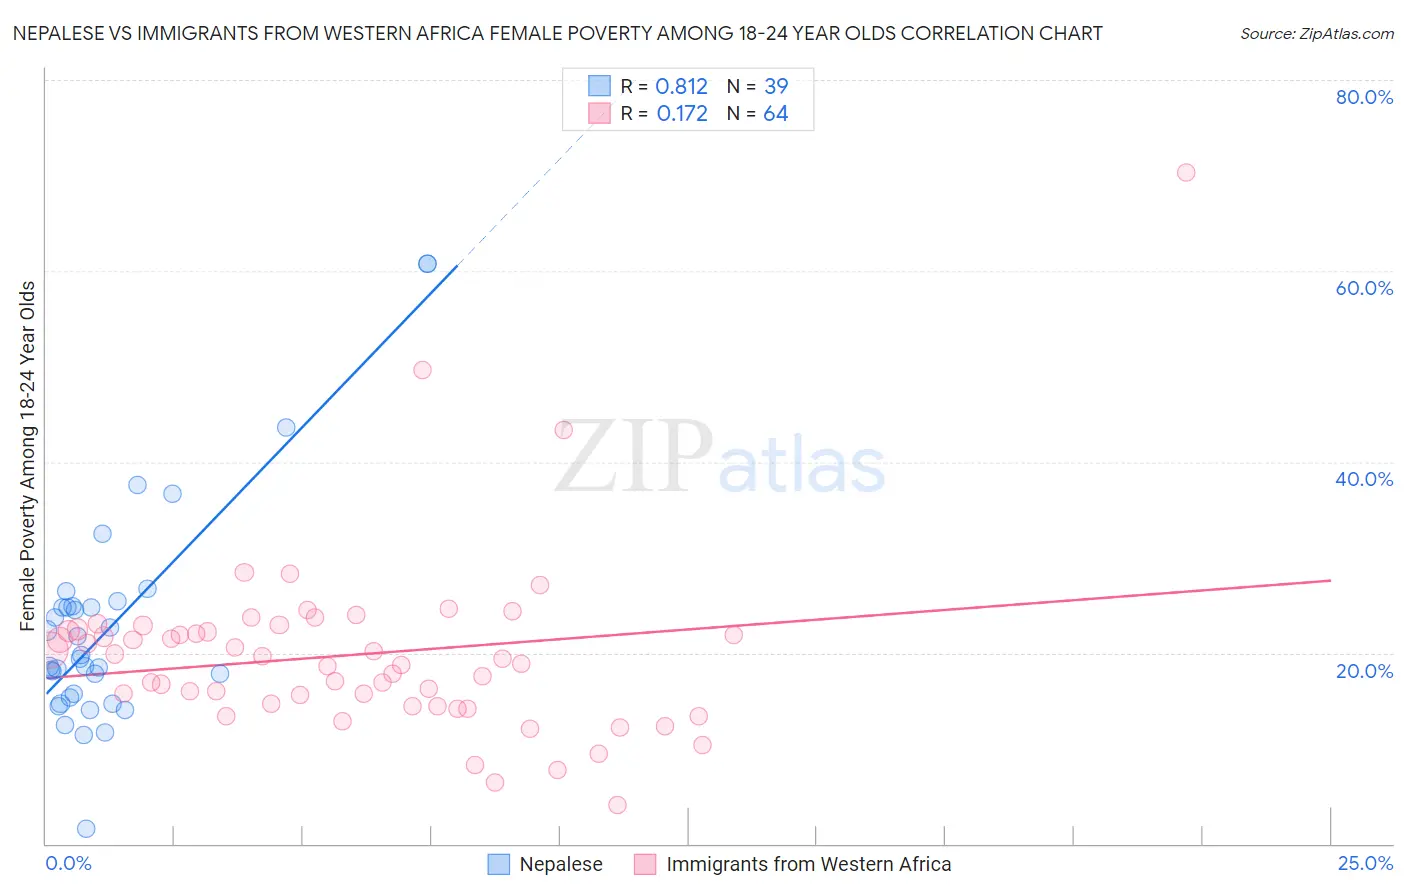 Nepalese vs Immigrants from Western Africa Female Poverty Among 18-24 Year Olds